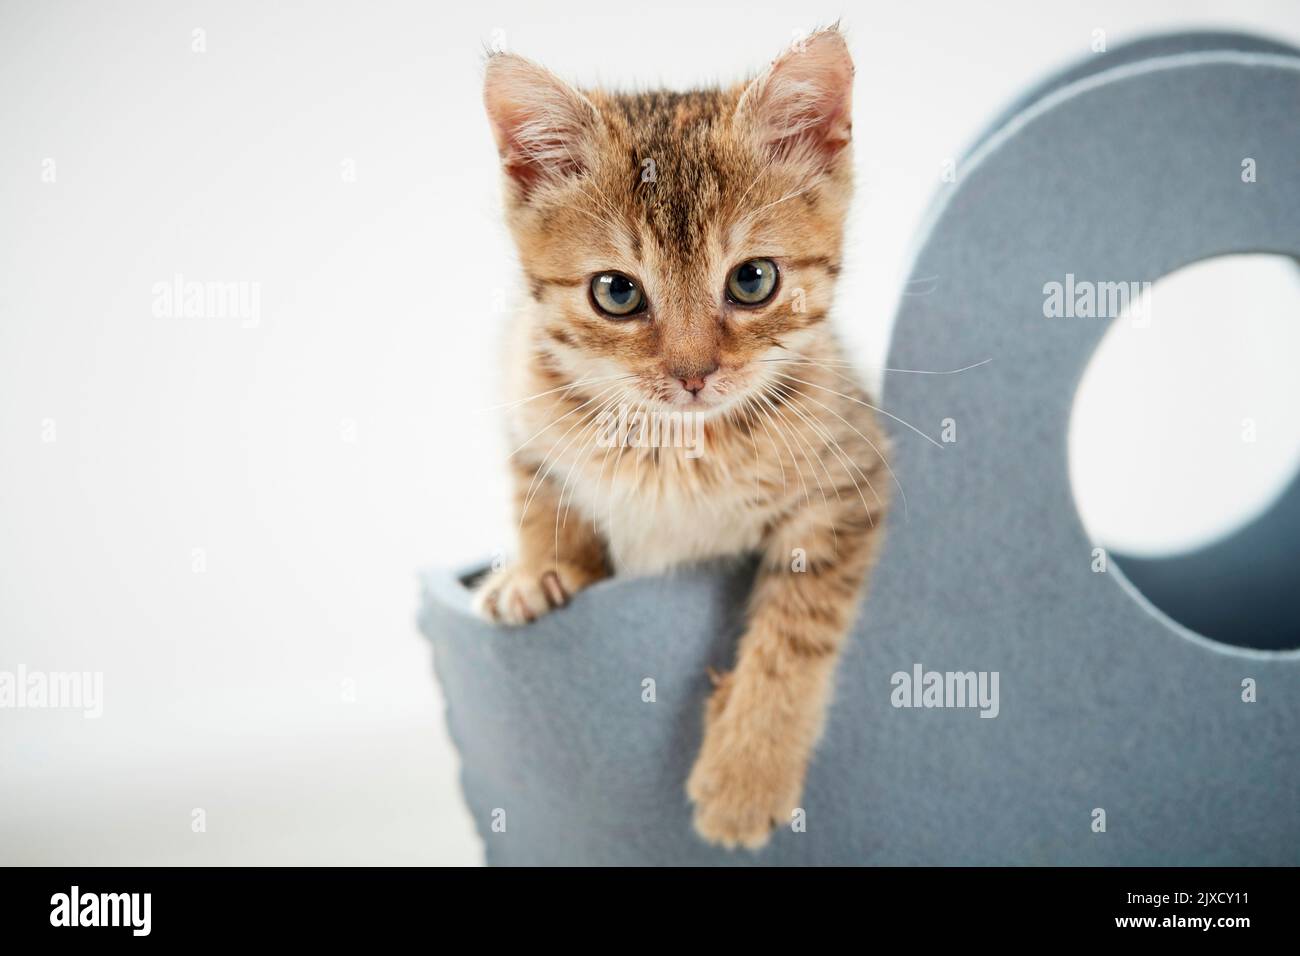 Domestic cat. A tabby kitten looks out of a felt bag, Germany Stock Photo